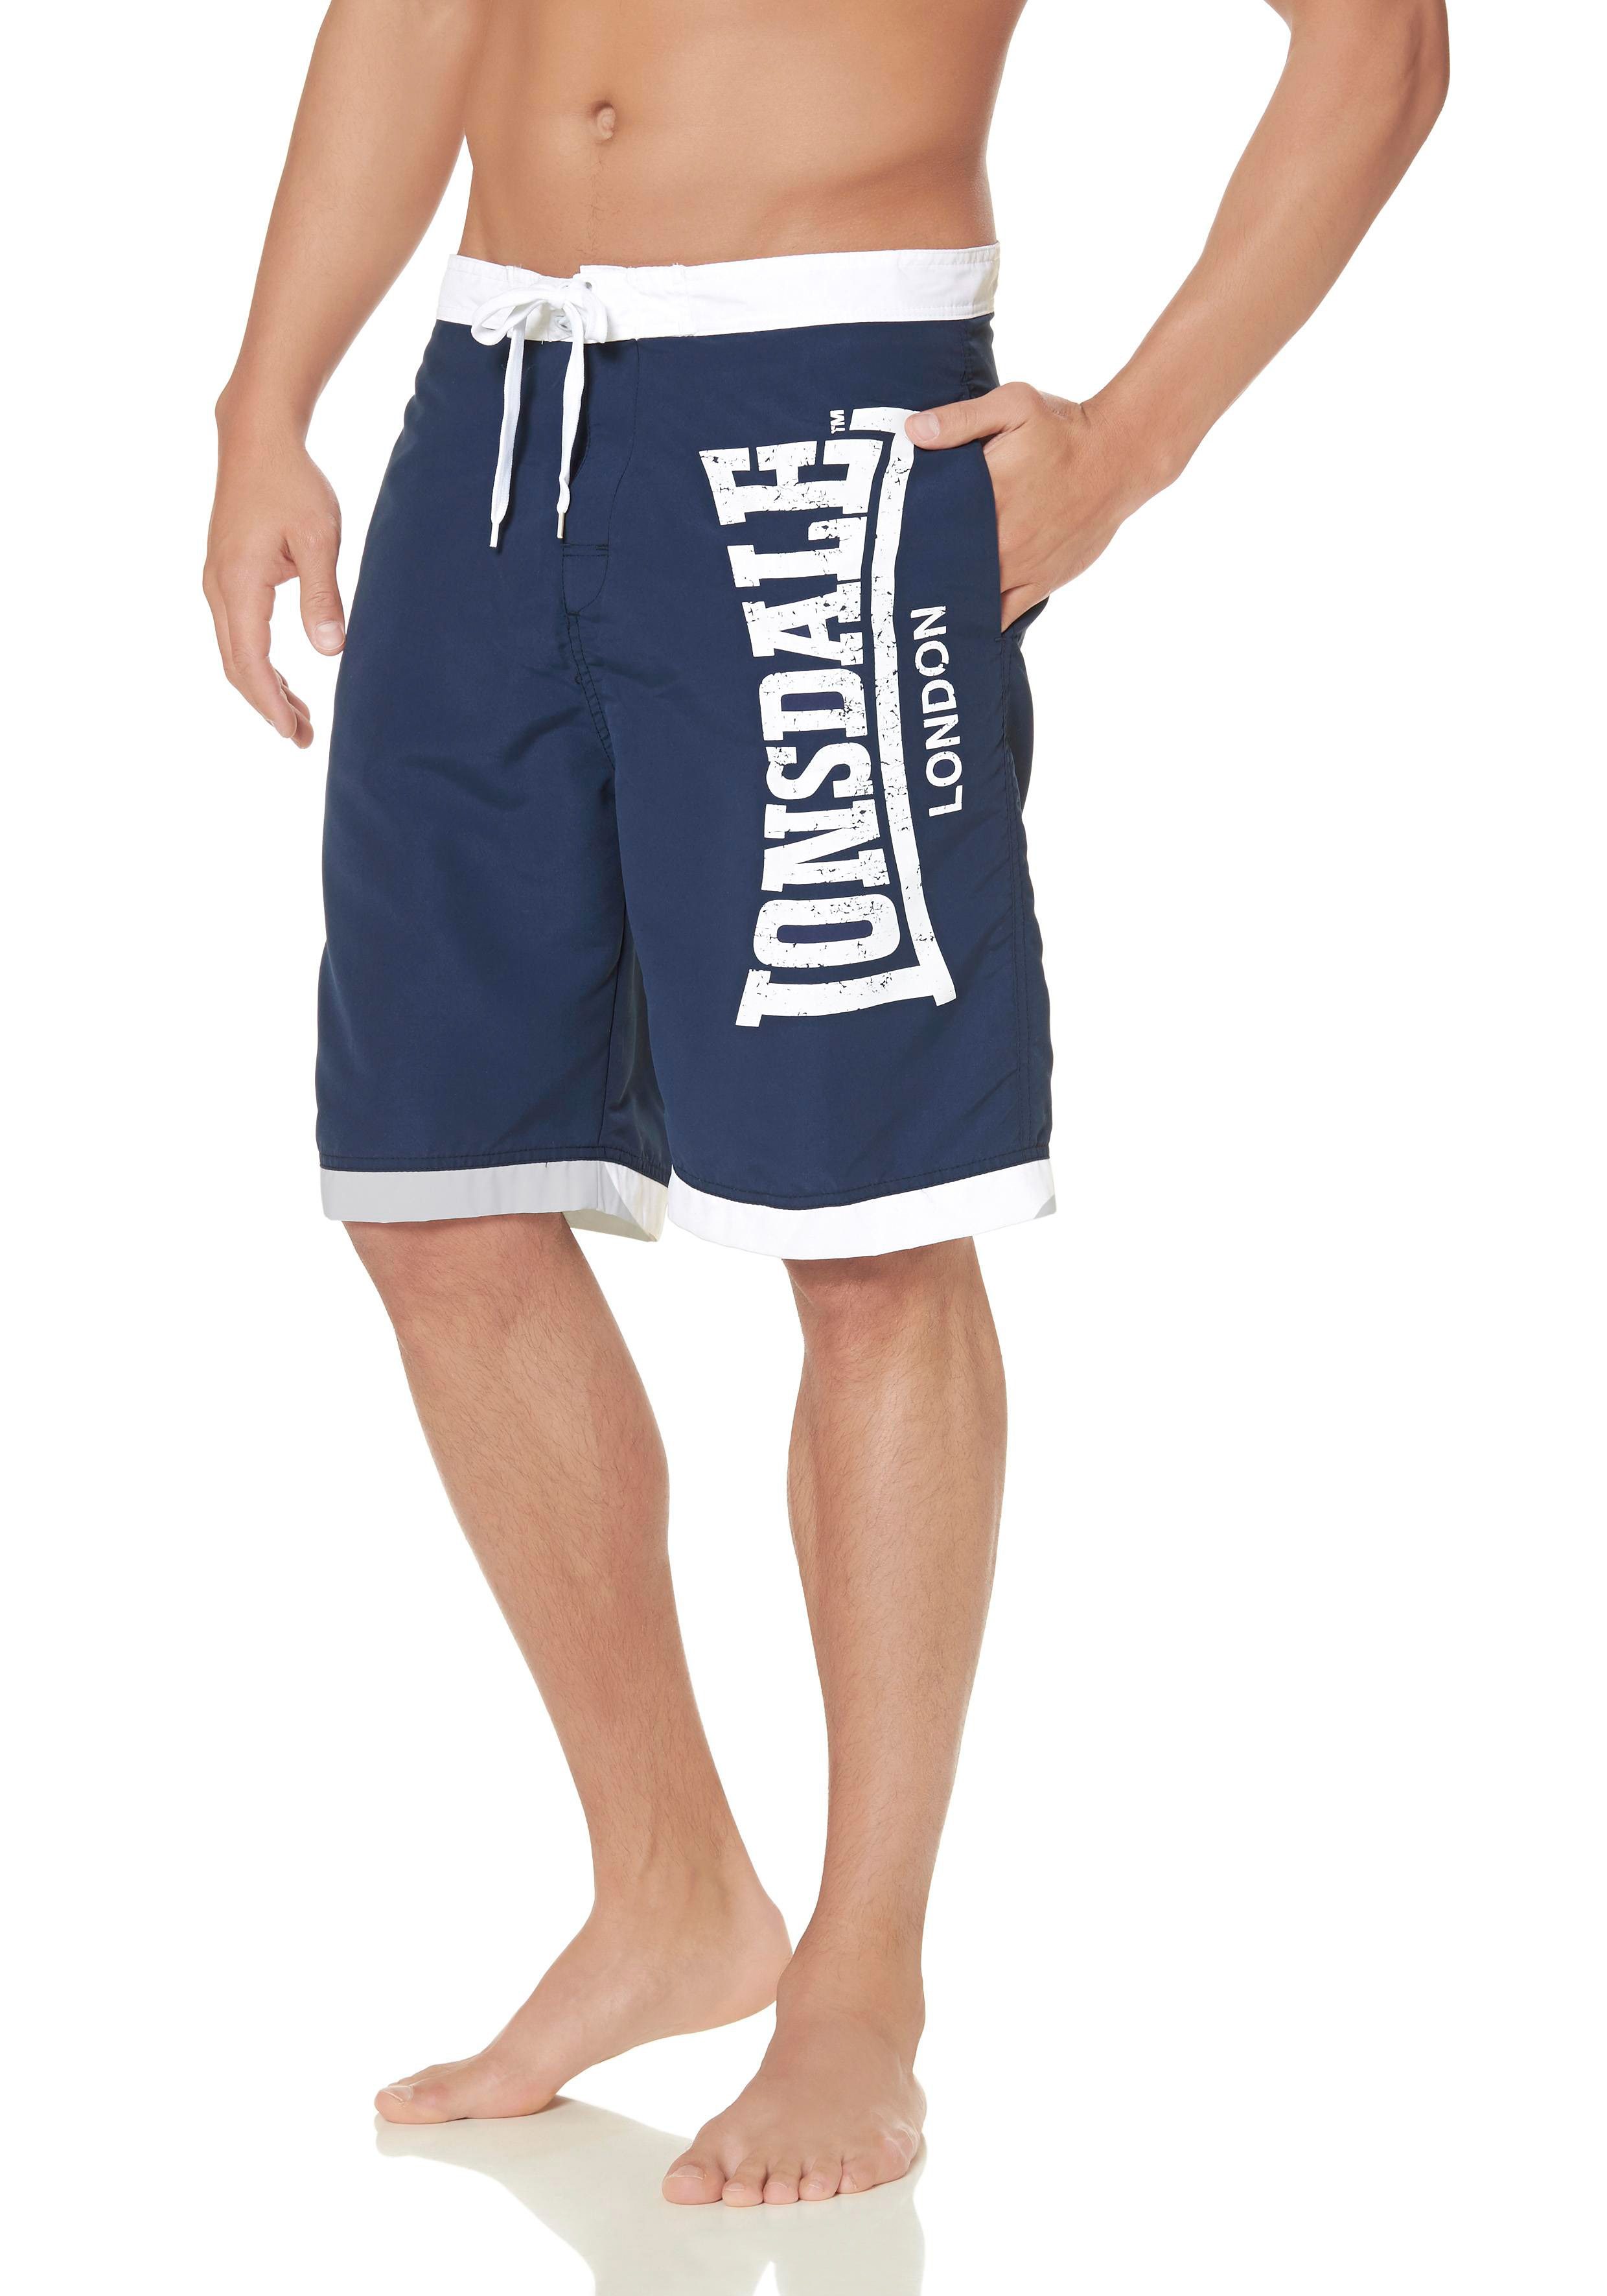 Lonsdale Mens CLENNELL Shorts, Navy/White, 4XL